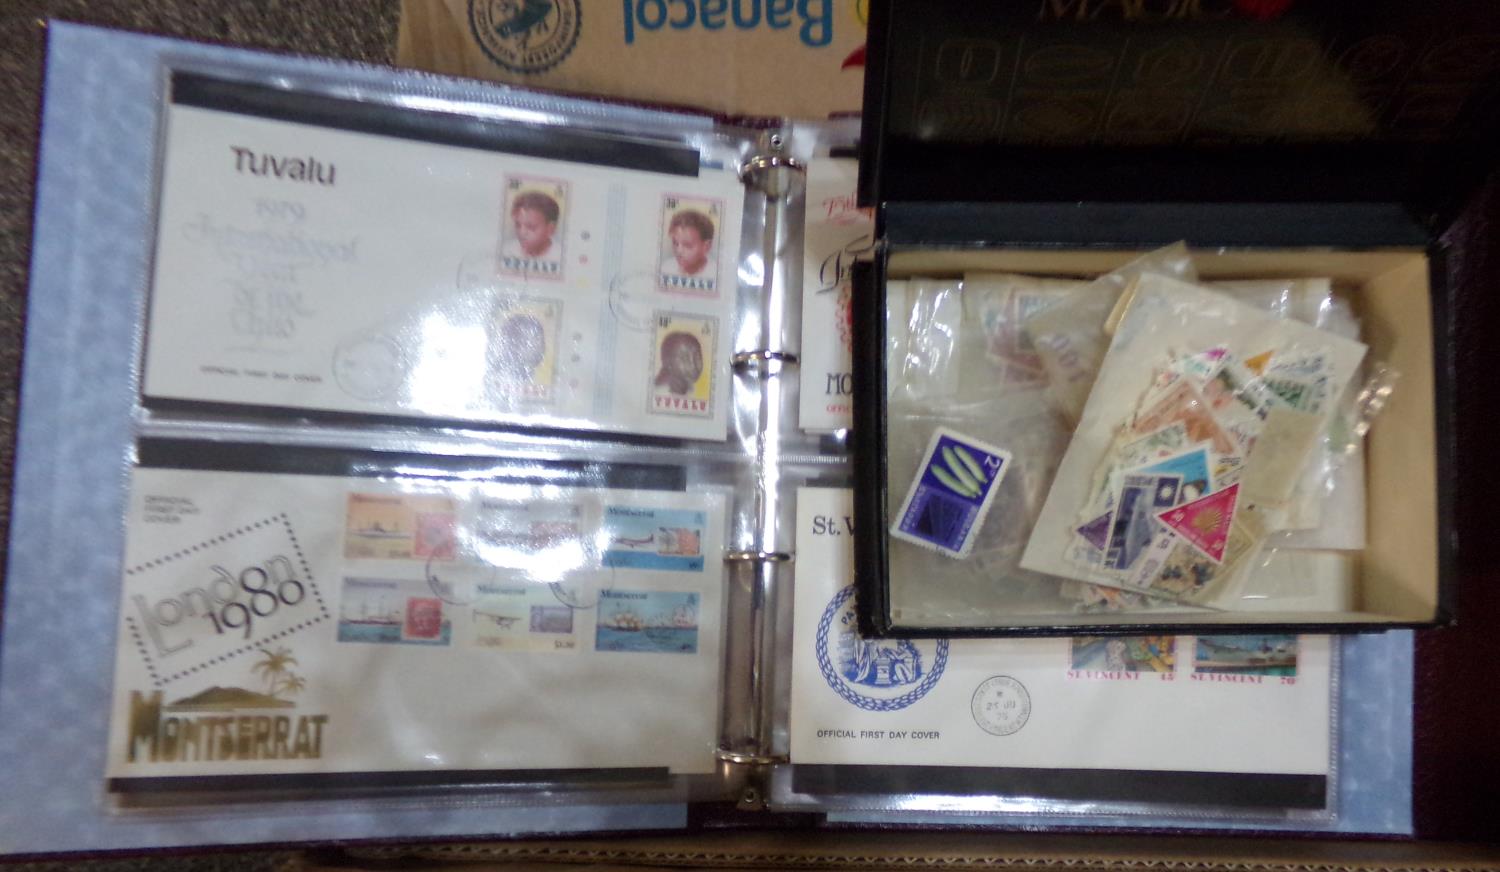 Box with all world collection of stamps in albums, boxes and envelopes. 100s of stamps. (B.P.